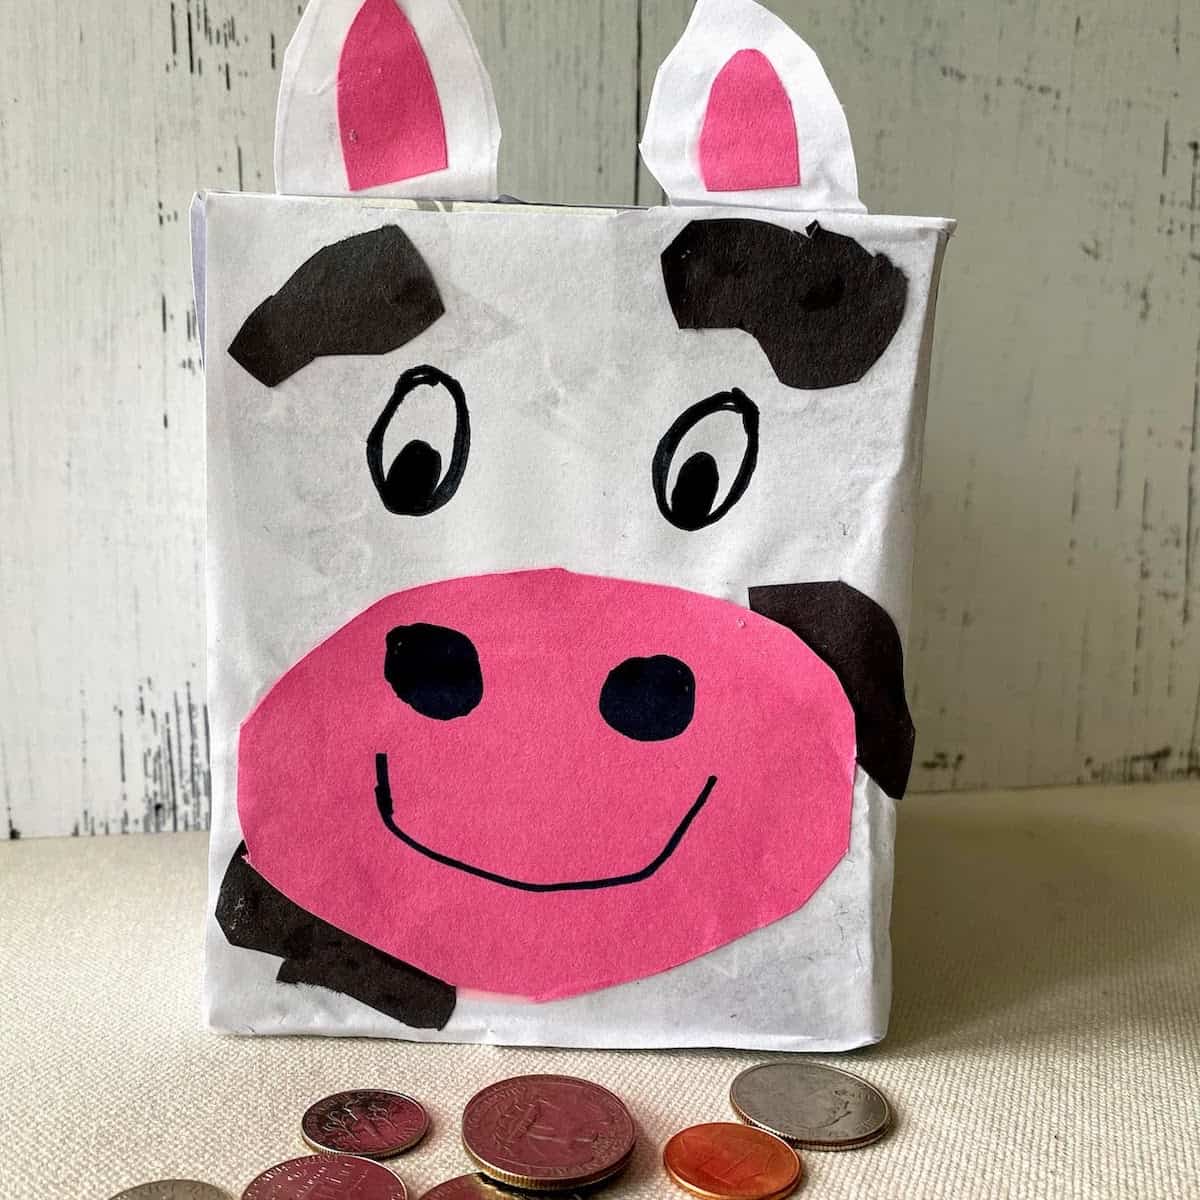 homemade cow piggy bank with coins